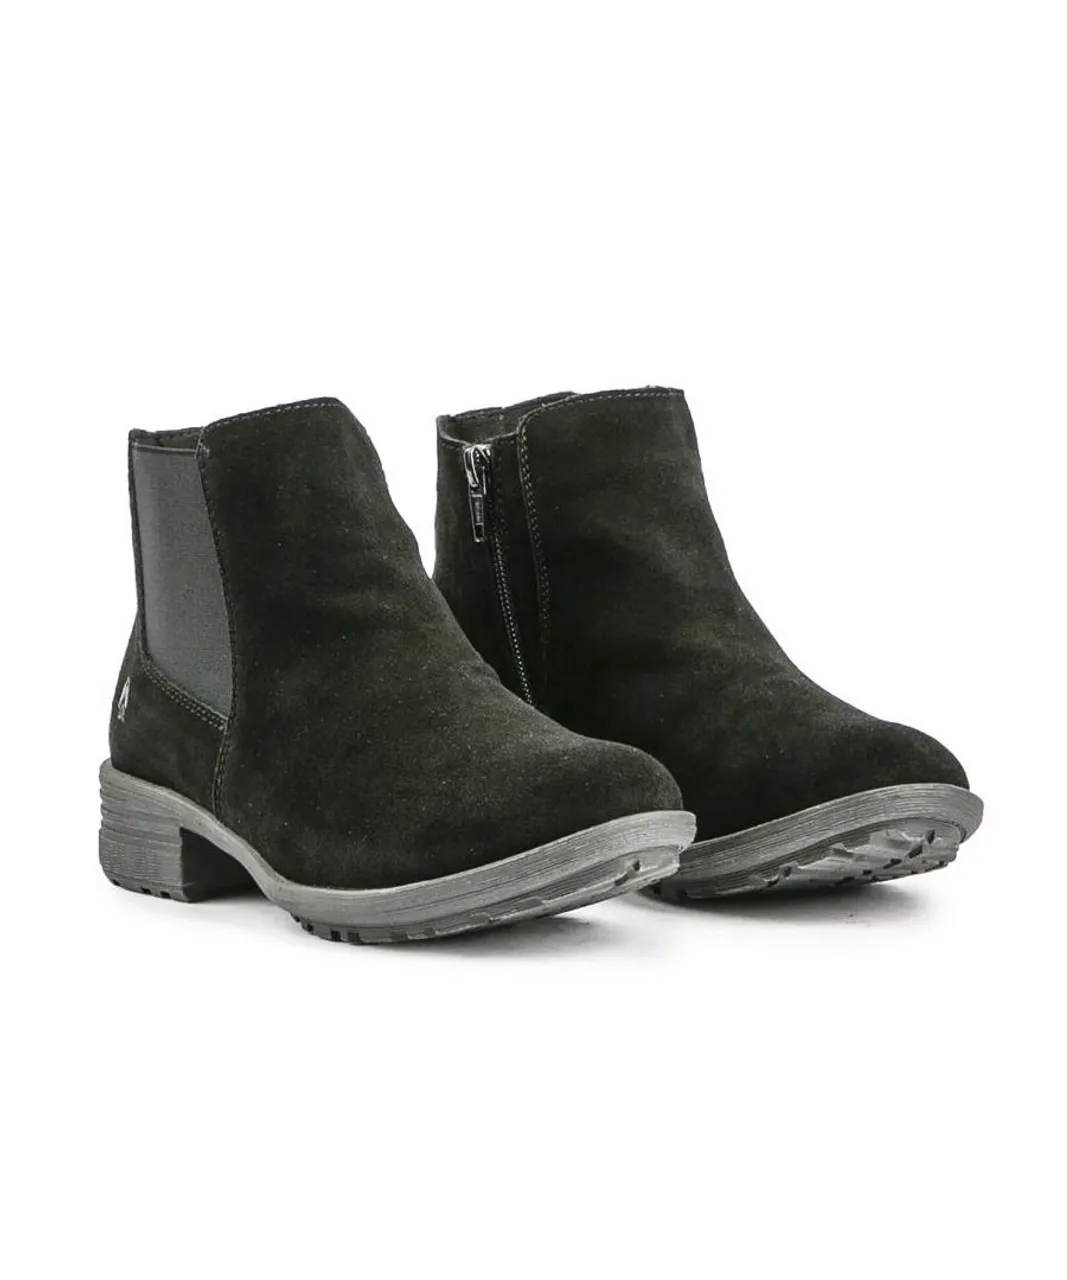 Hush Puppies Womens Madyson Boots - Black Suede